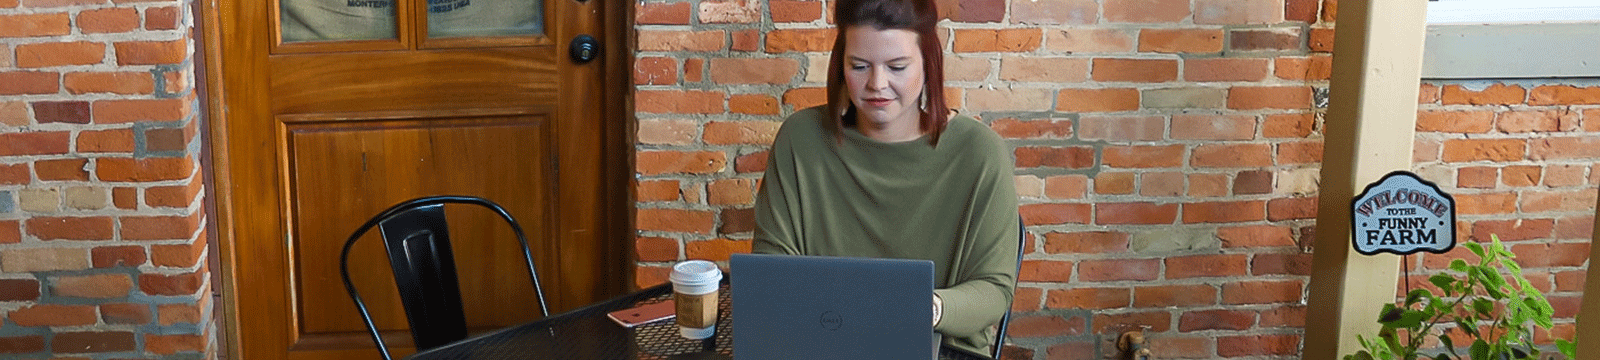 Woman sitting on a patio with coffee looking at laptop.